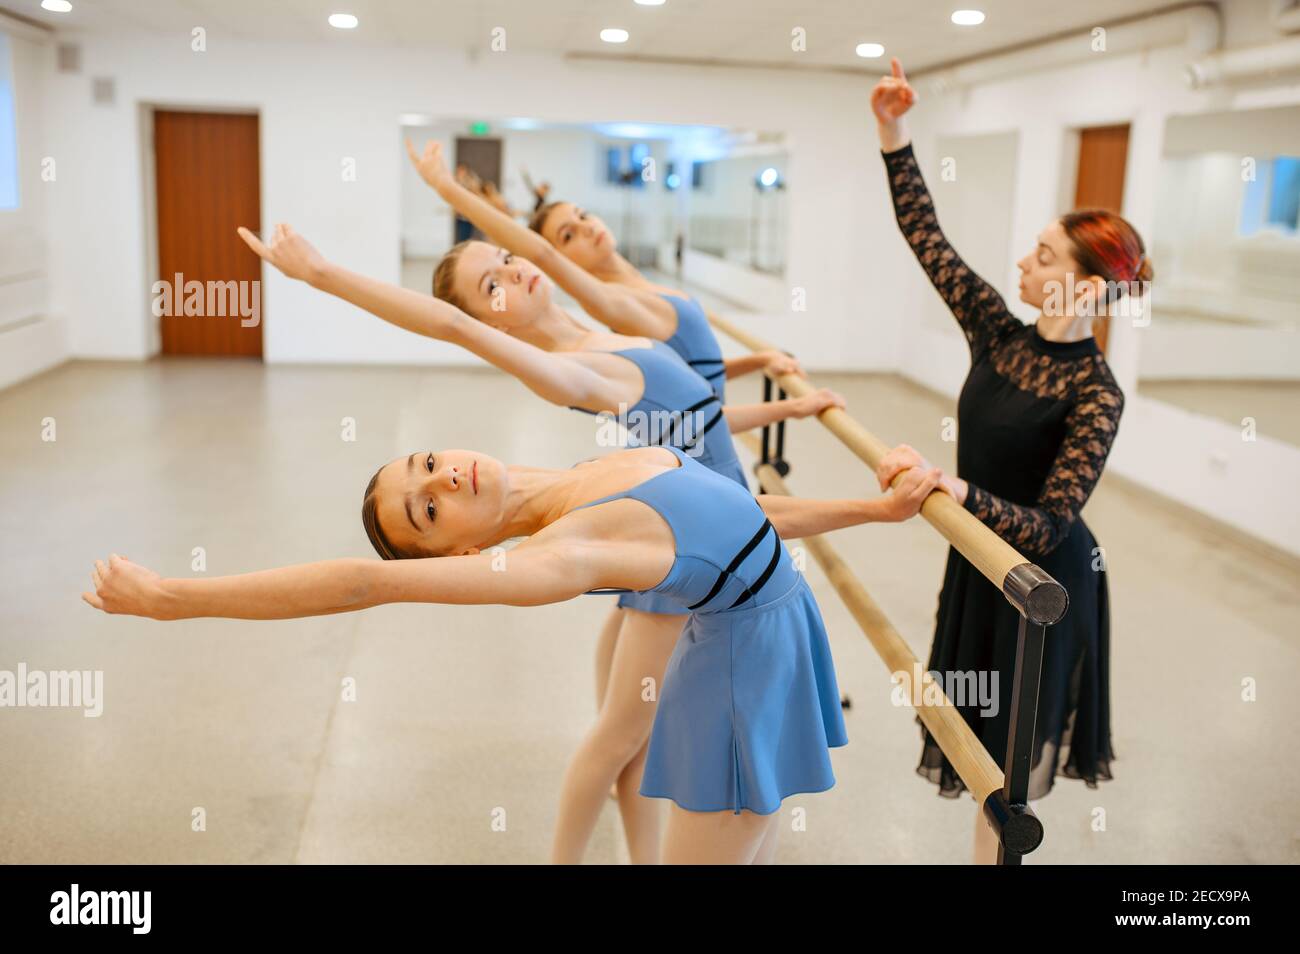 Teacher works with ballerinas at barre in class Stock Photo